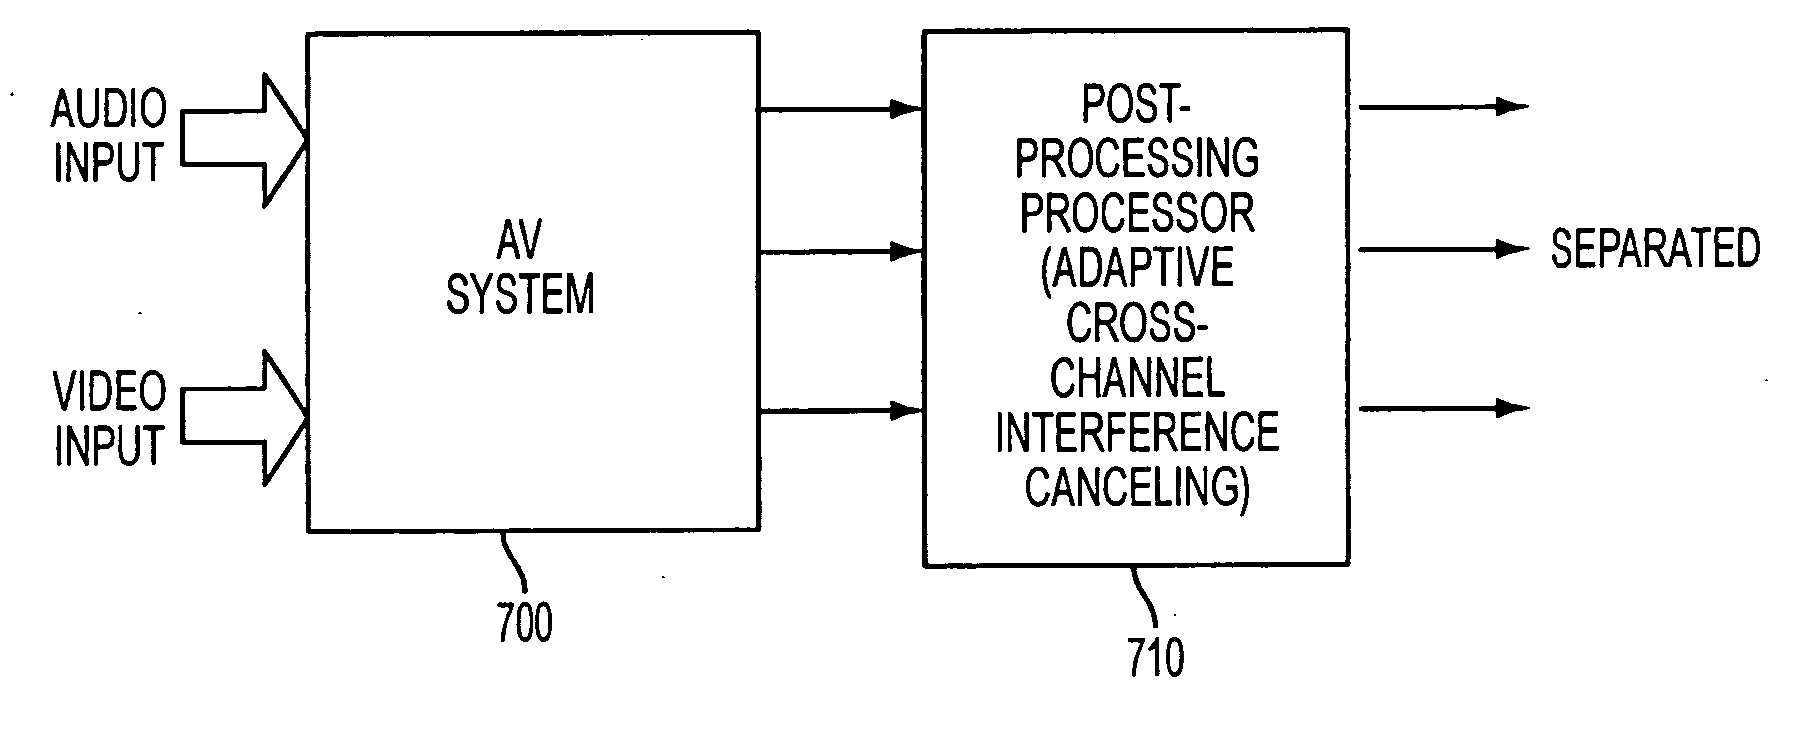 Apparatus and method performing audio-video sensor fusion for object localization, tracking, and separation